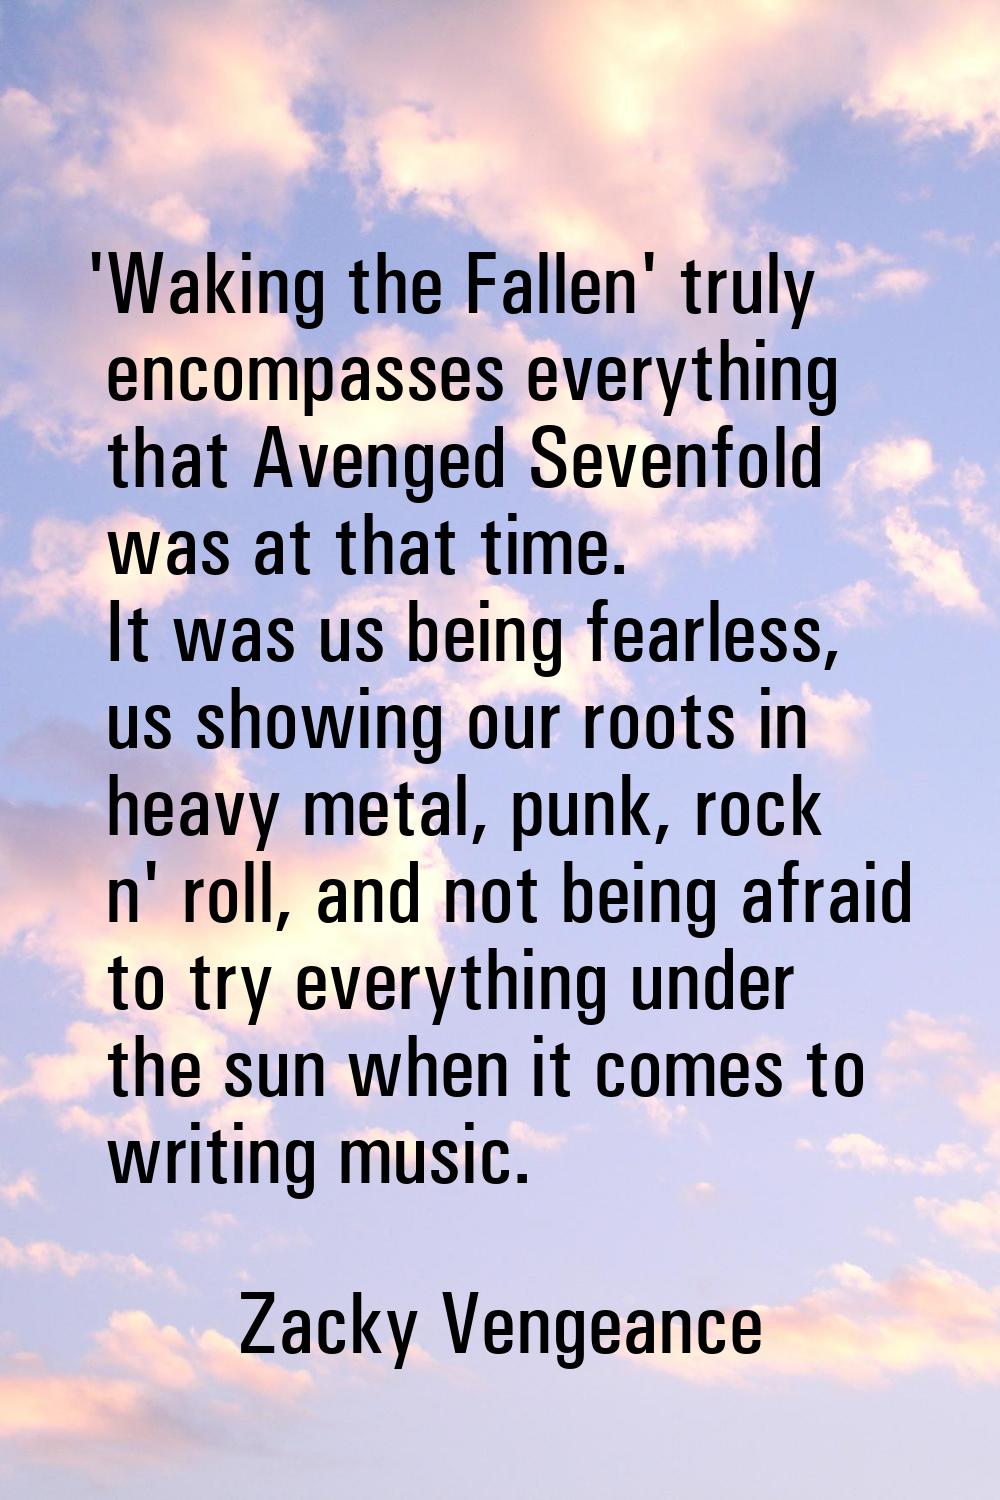 'Waking the Fallen' truly encompasses everything that Avenged Sevenfold was at that time. It was us